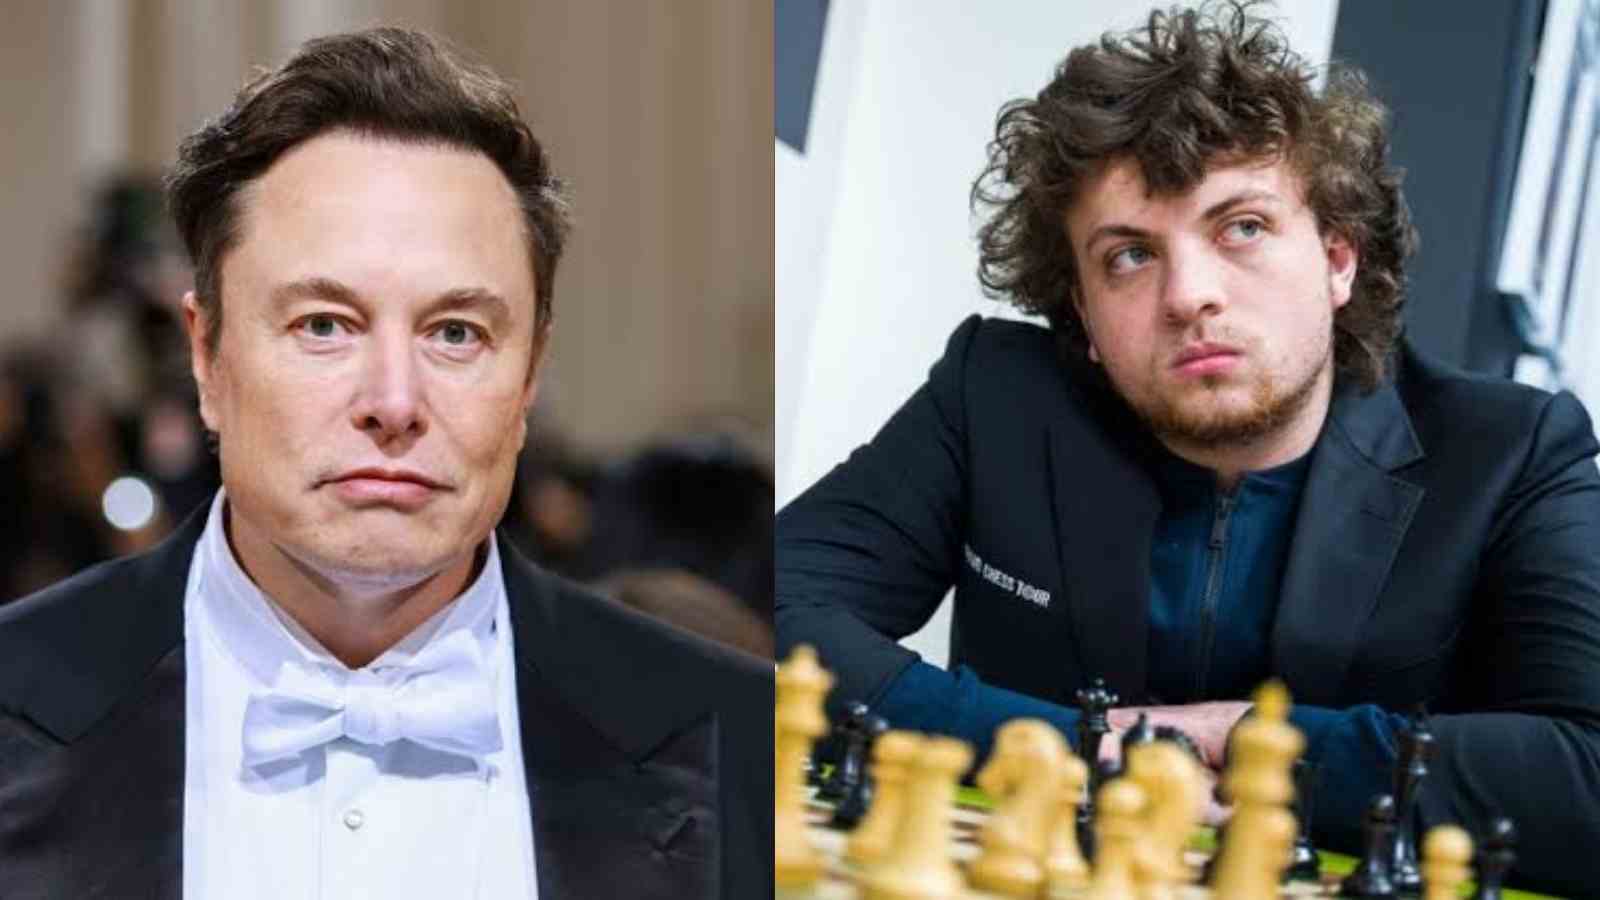 Elon Musk agrees: chess champion cheated, used anal beads for comms